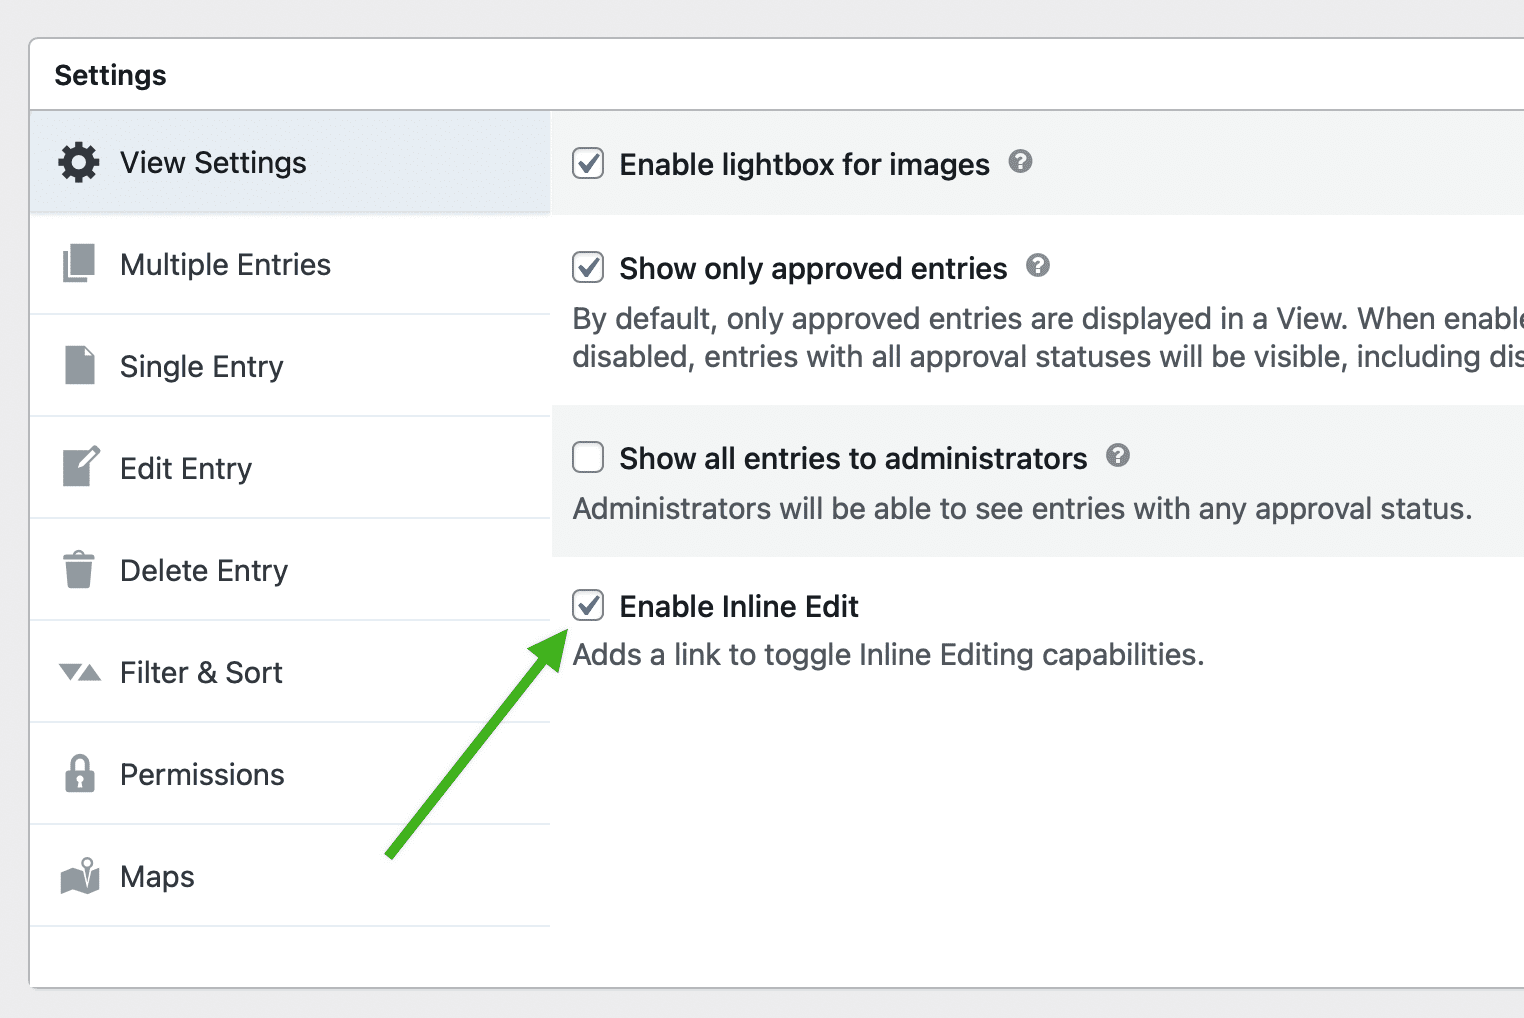 Screenshot of the Settings box when editing a View. A green arrow points to the 'Enable Inline Edit' setting, which is checked.